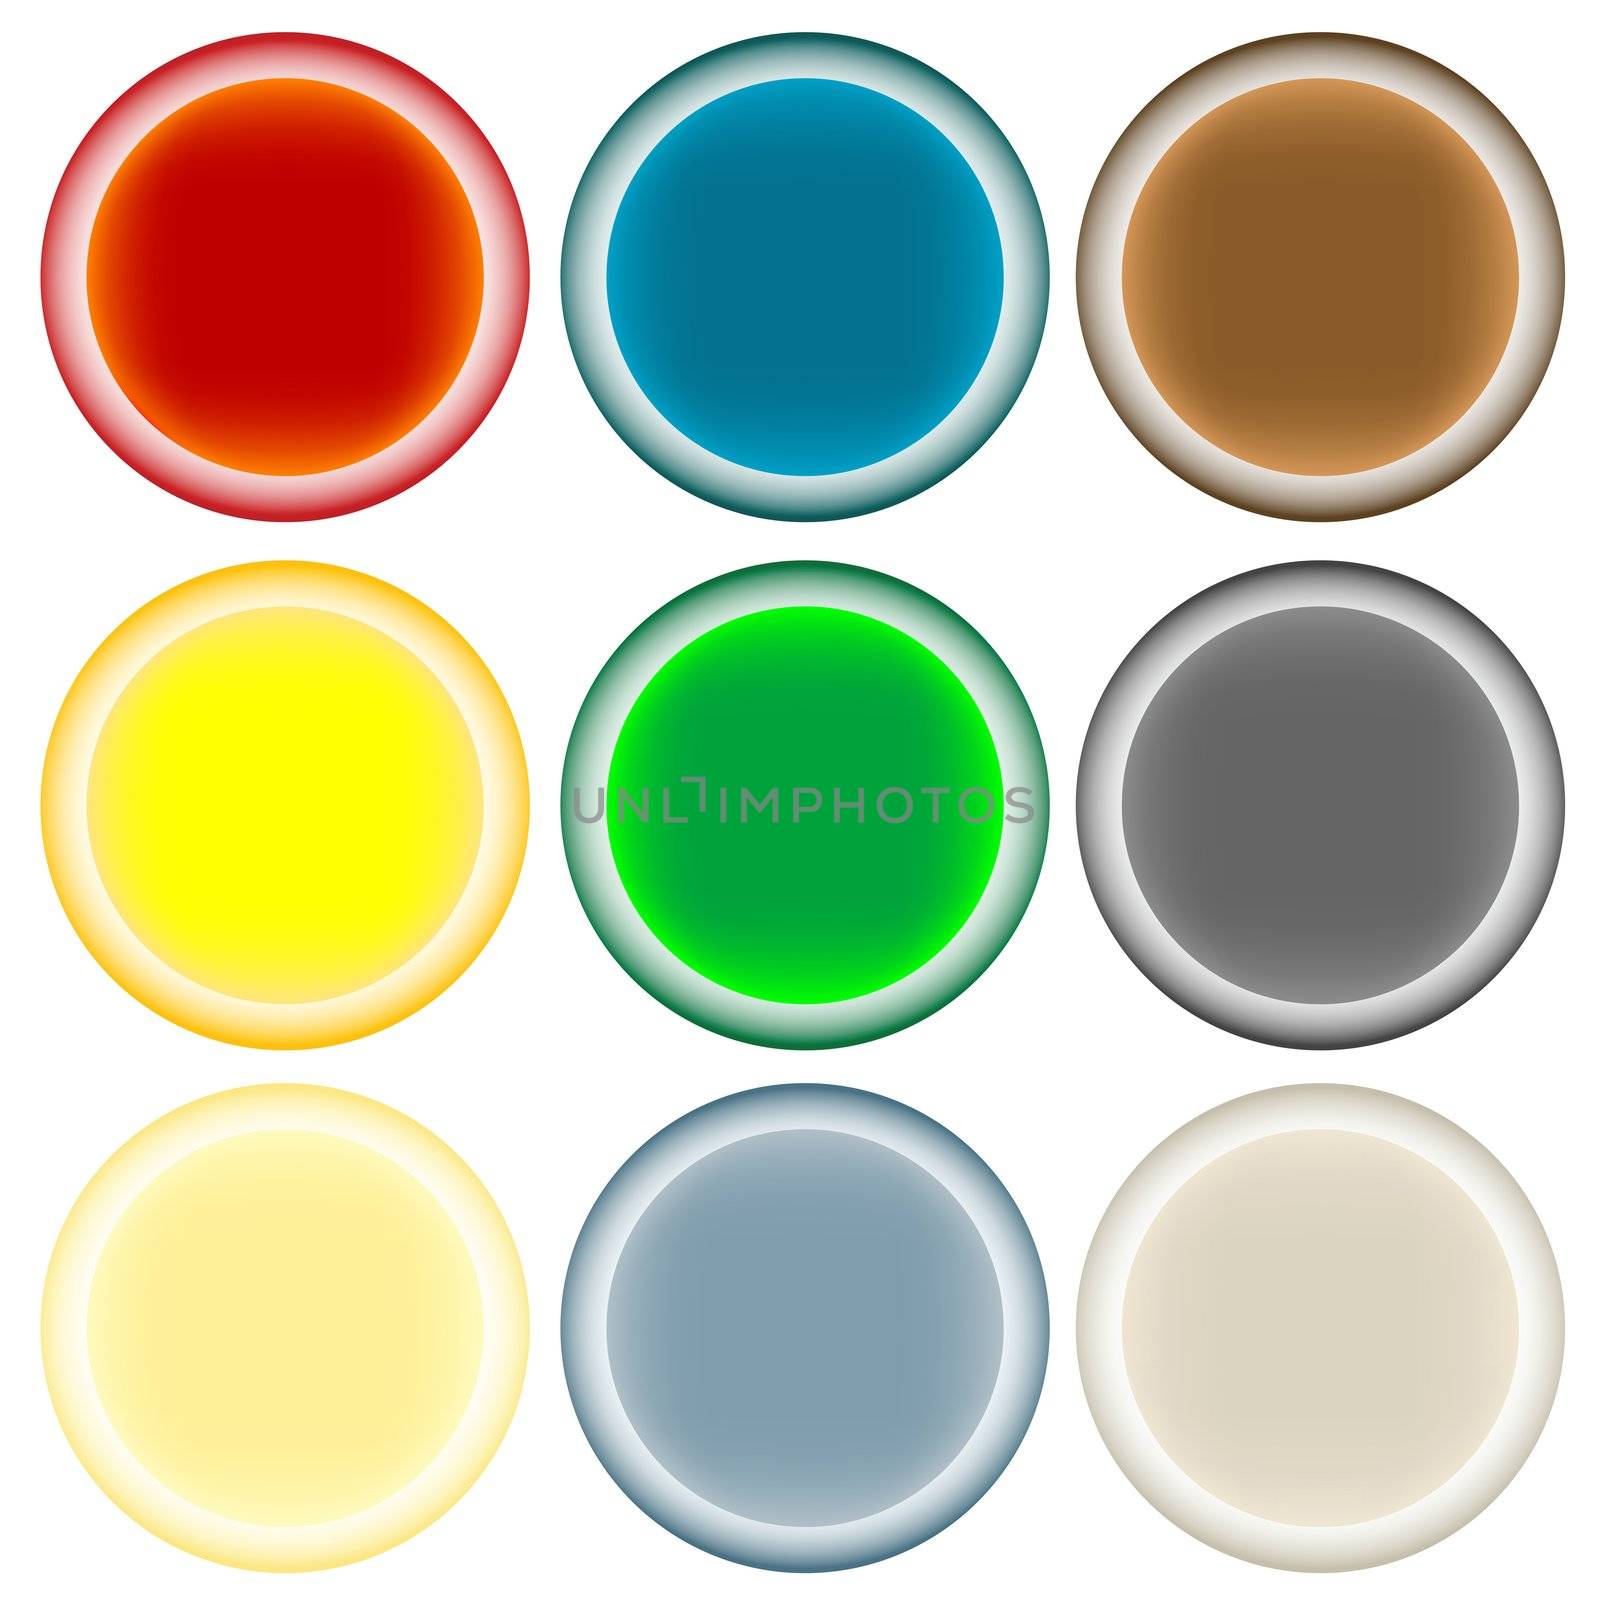 buttons for web, vector art illustration; more buttons in my gallery